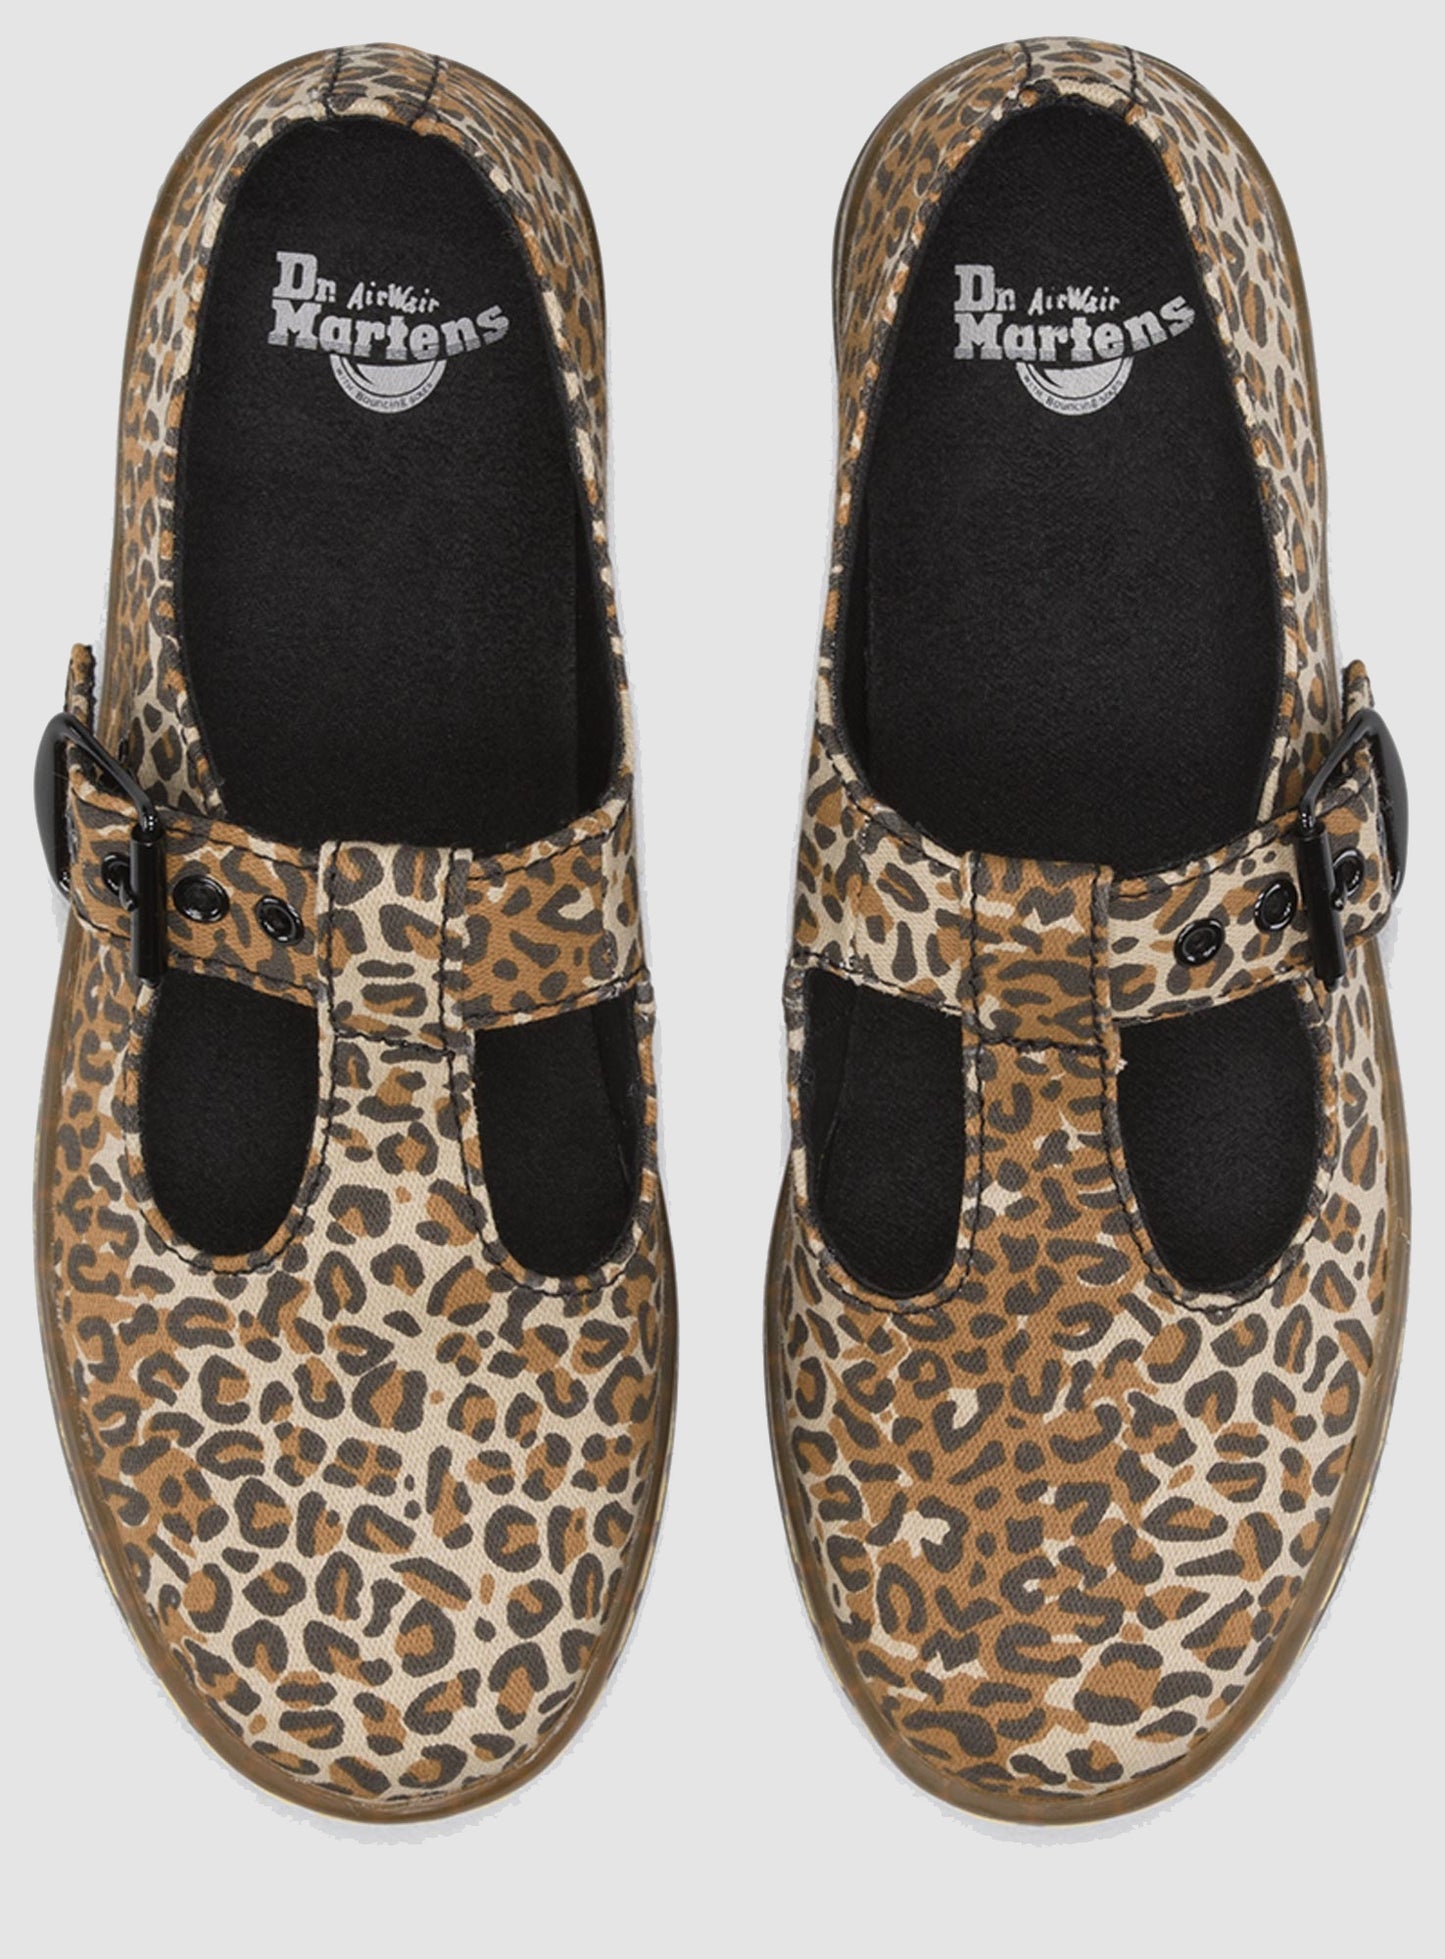 Woolwich Mary Jane Canvas (leopard print)